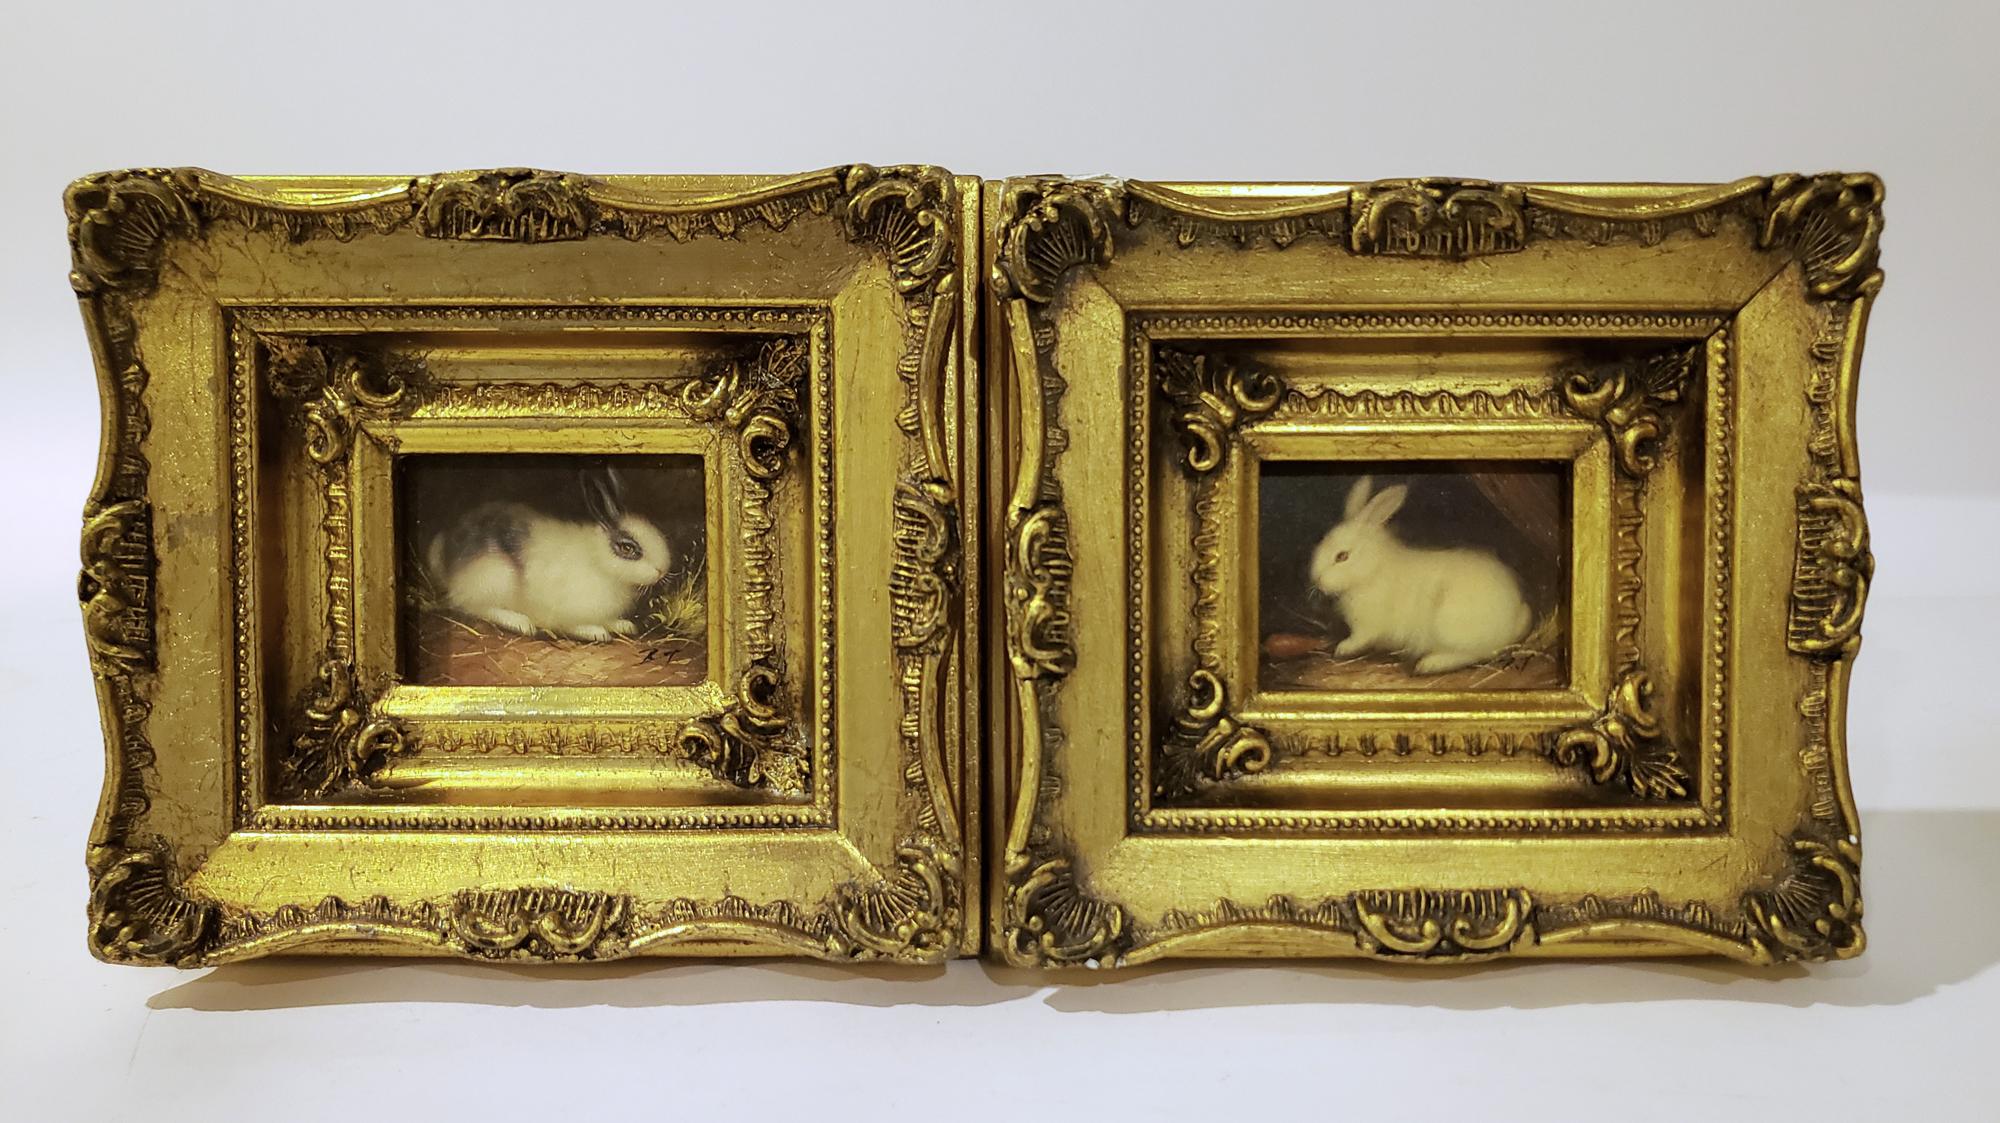 20th Century Miniaiture Paintings of Rabbits, a Pair